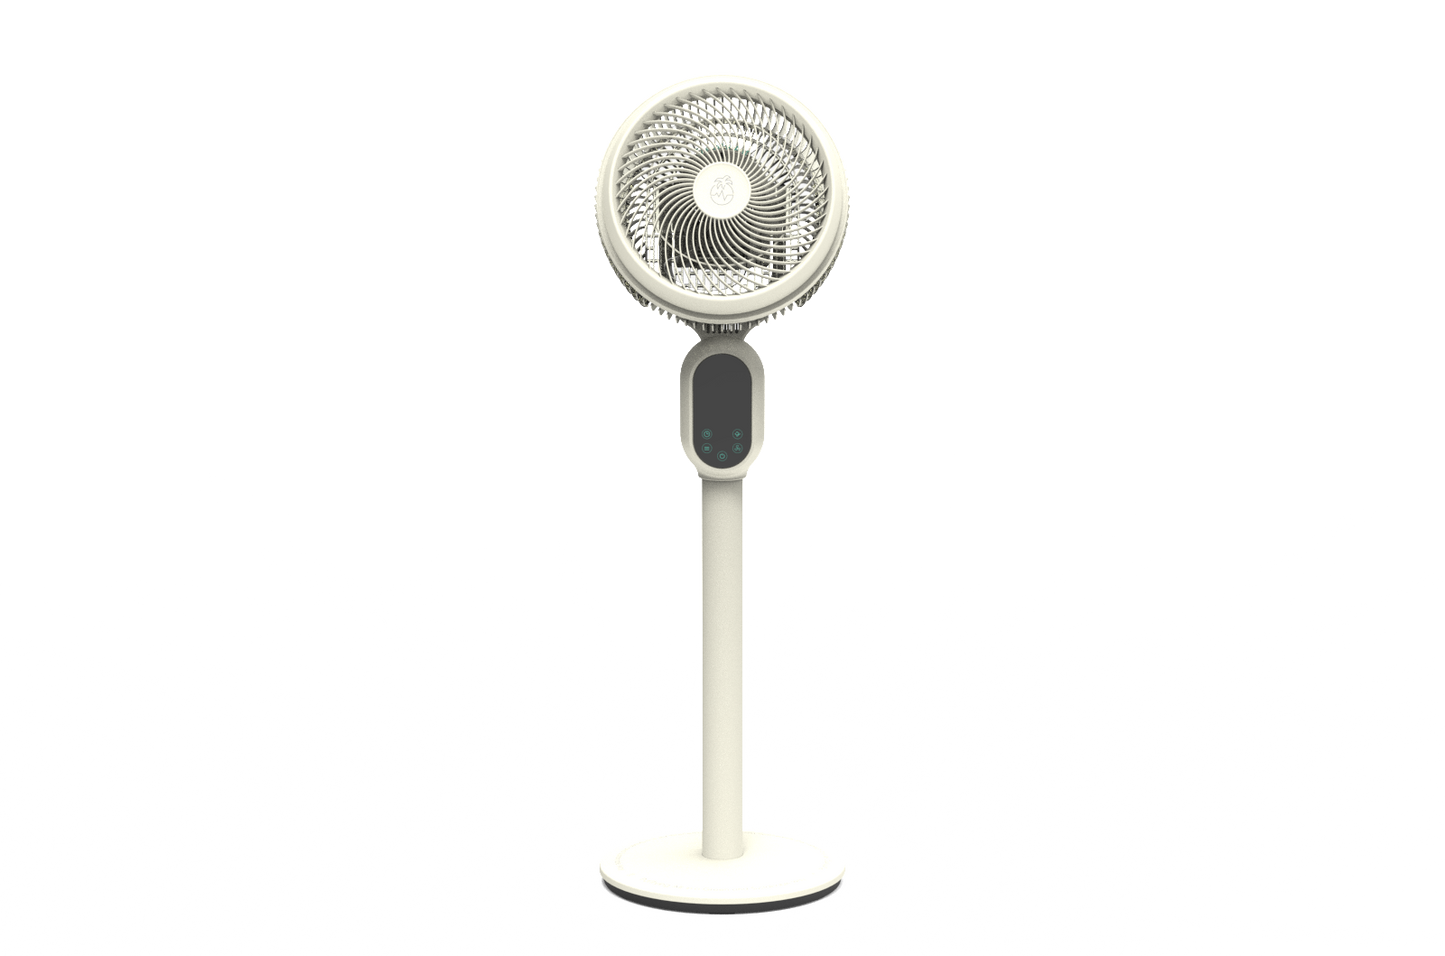 Treely Fan - The first air purifying circulation fan